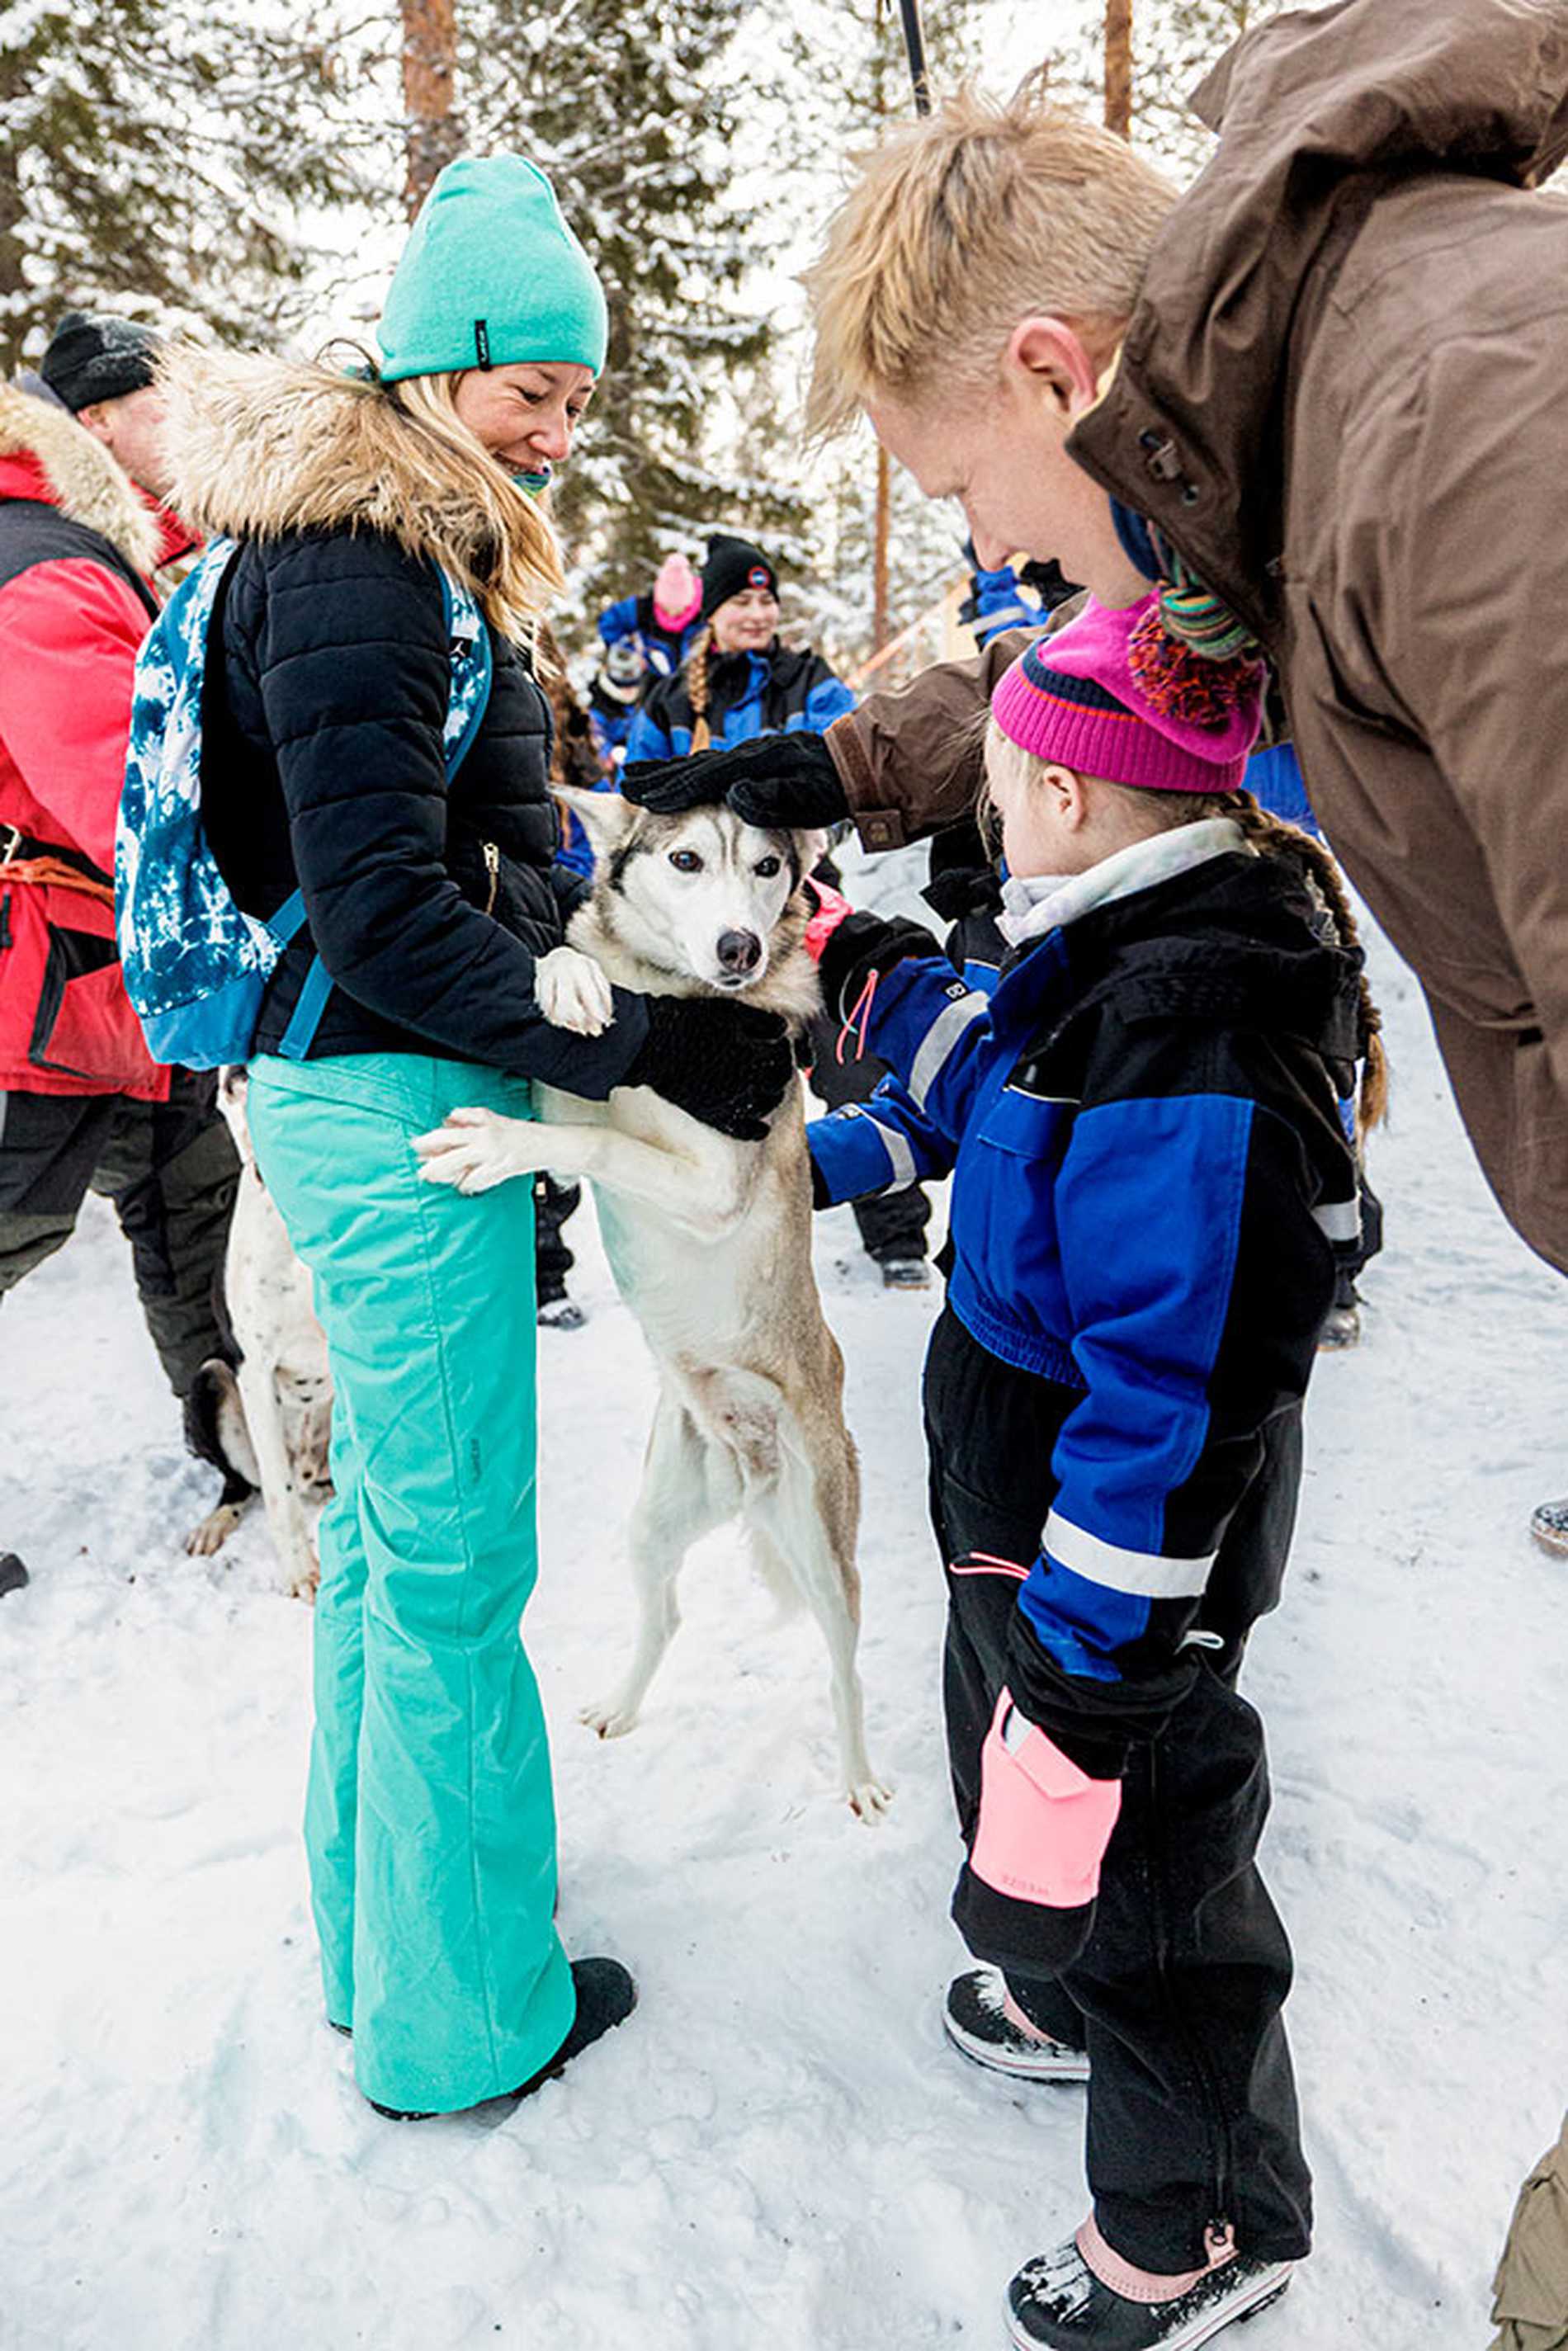 Alice petting one of the huskies before her dog sled ride.